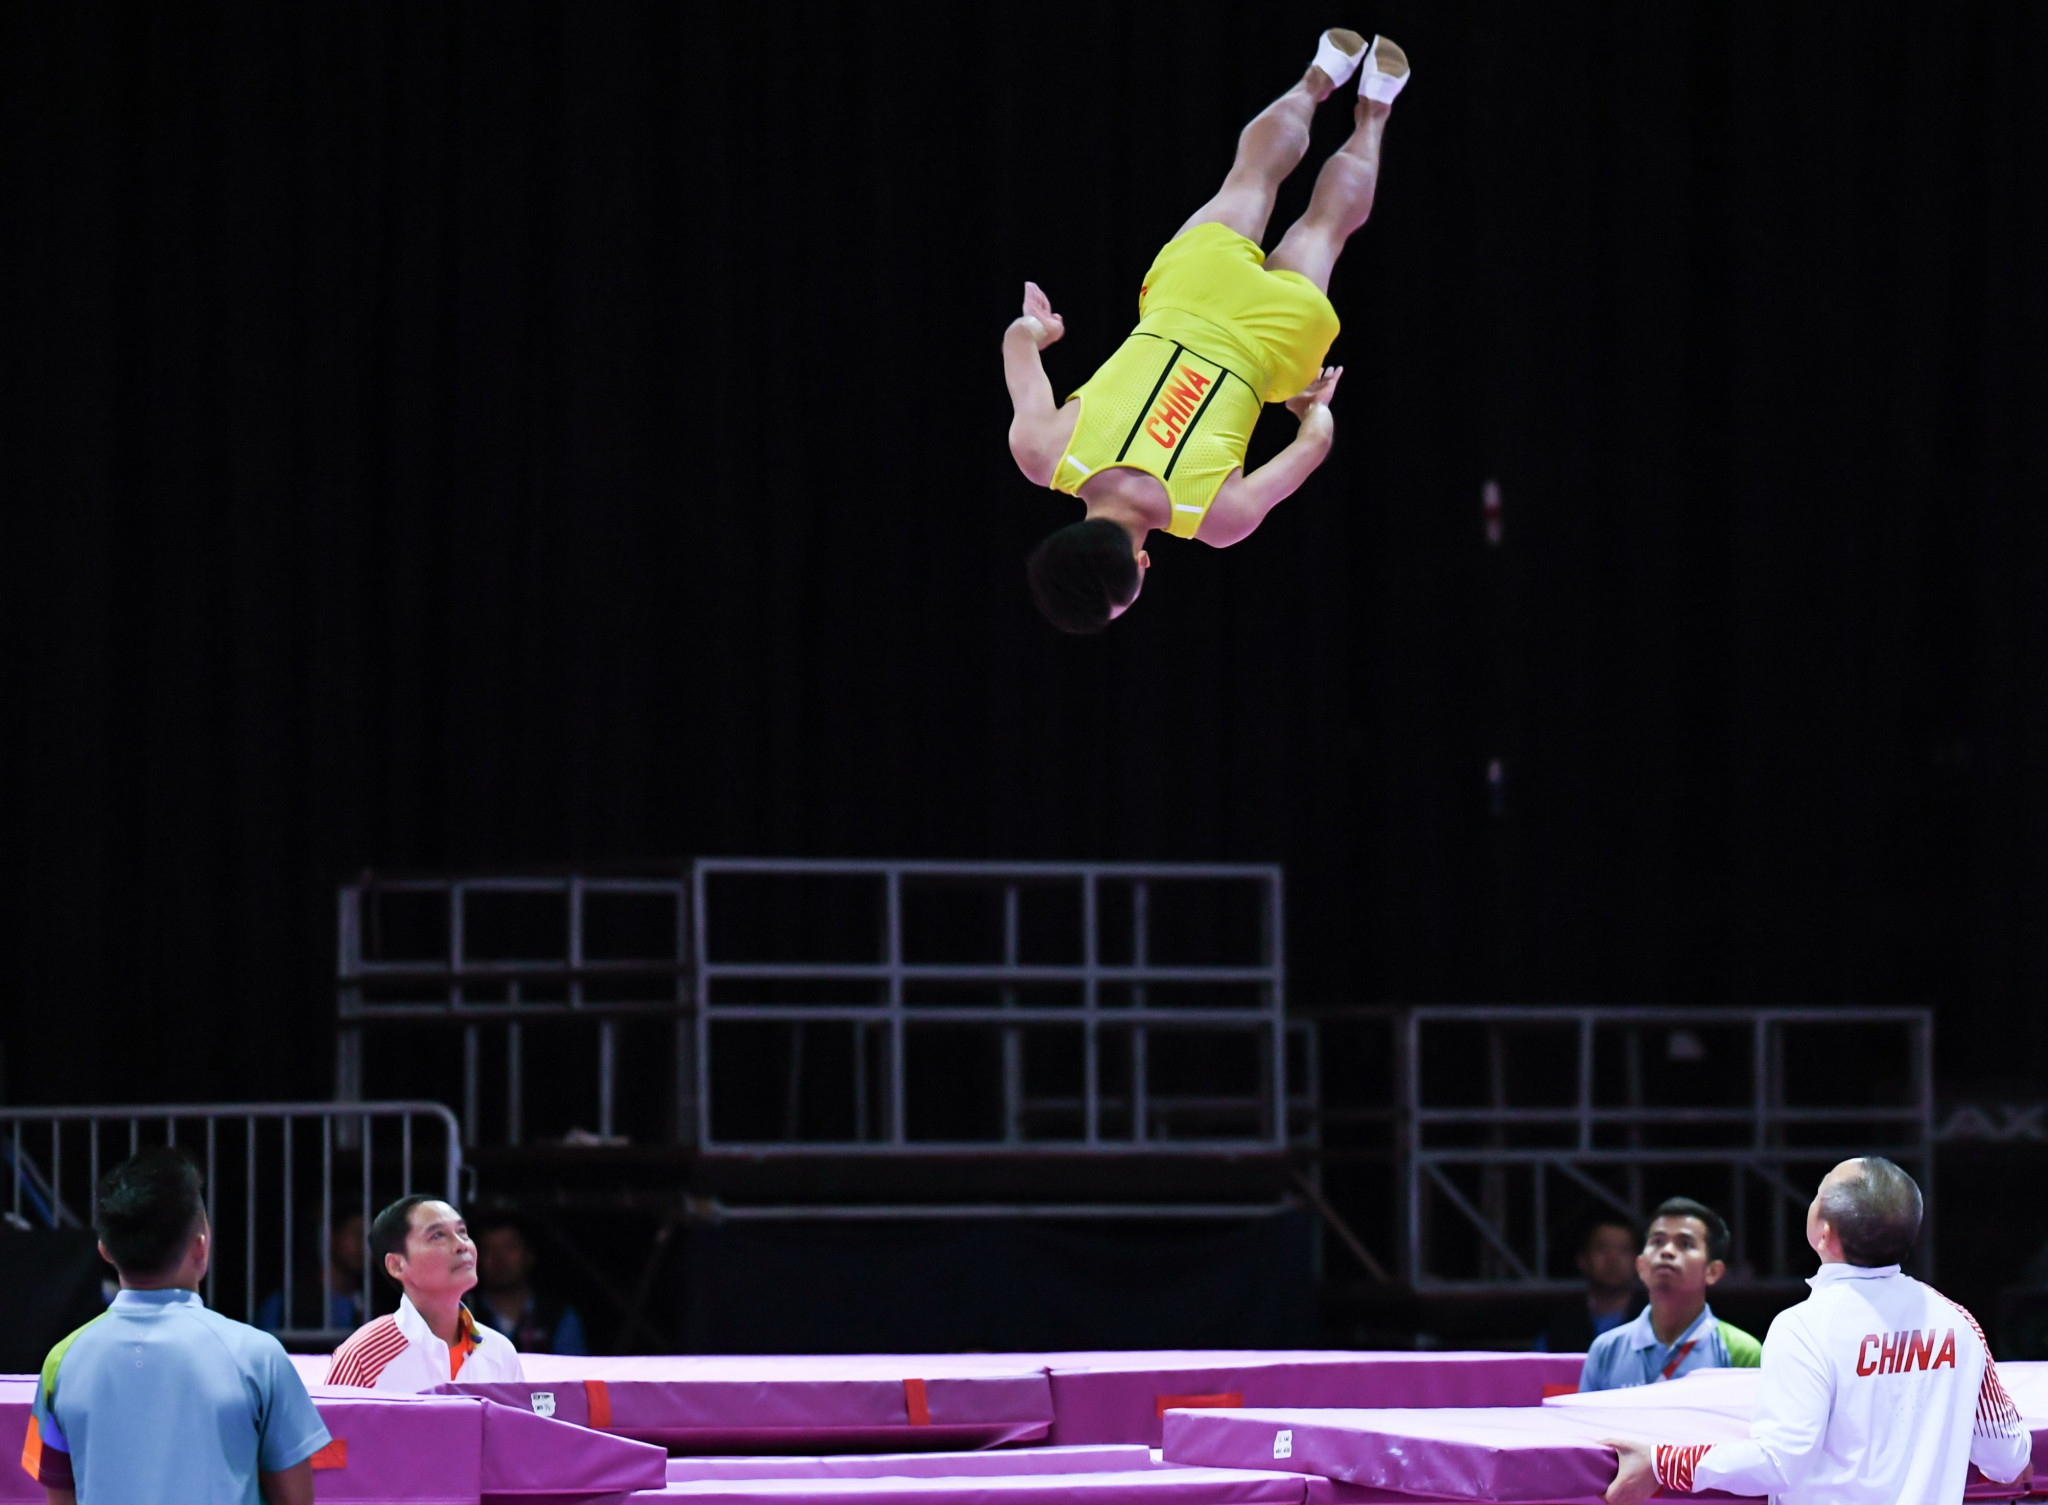 China's Dong Dong won the men's trampoline event for a third successive edition of the Asian Games ©Getty Images